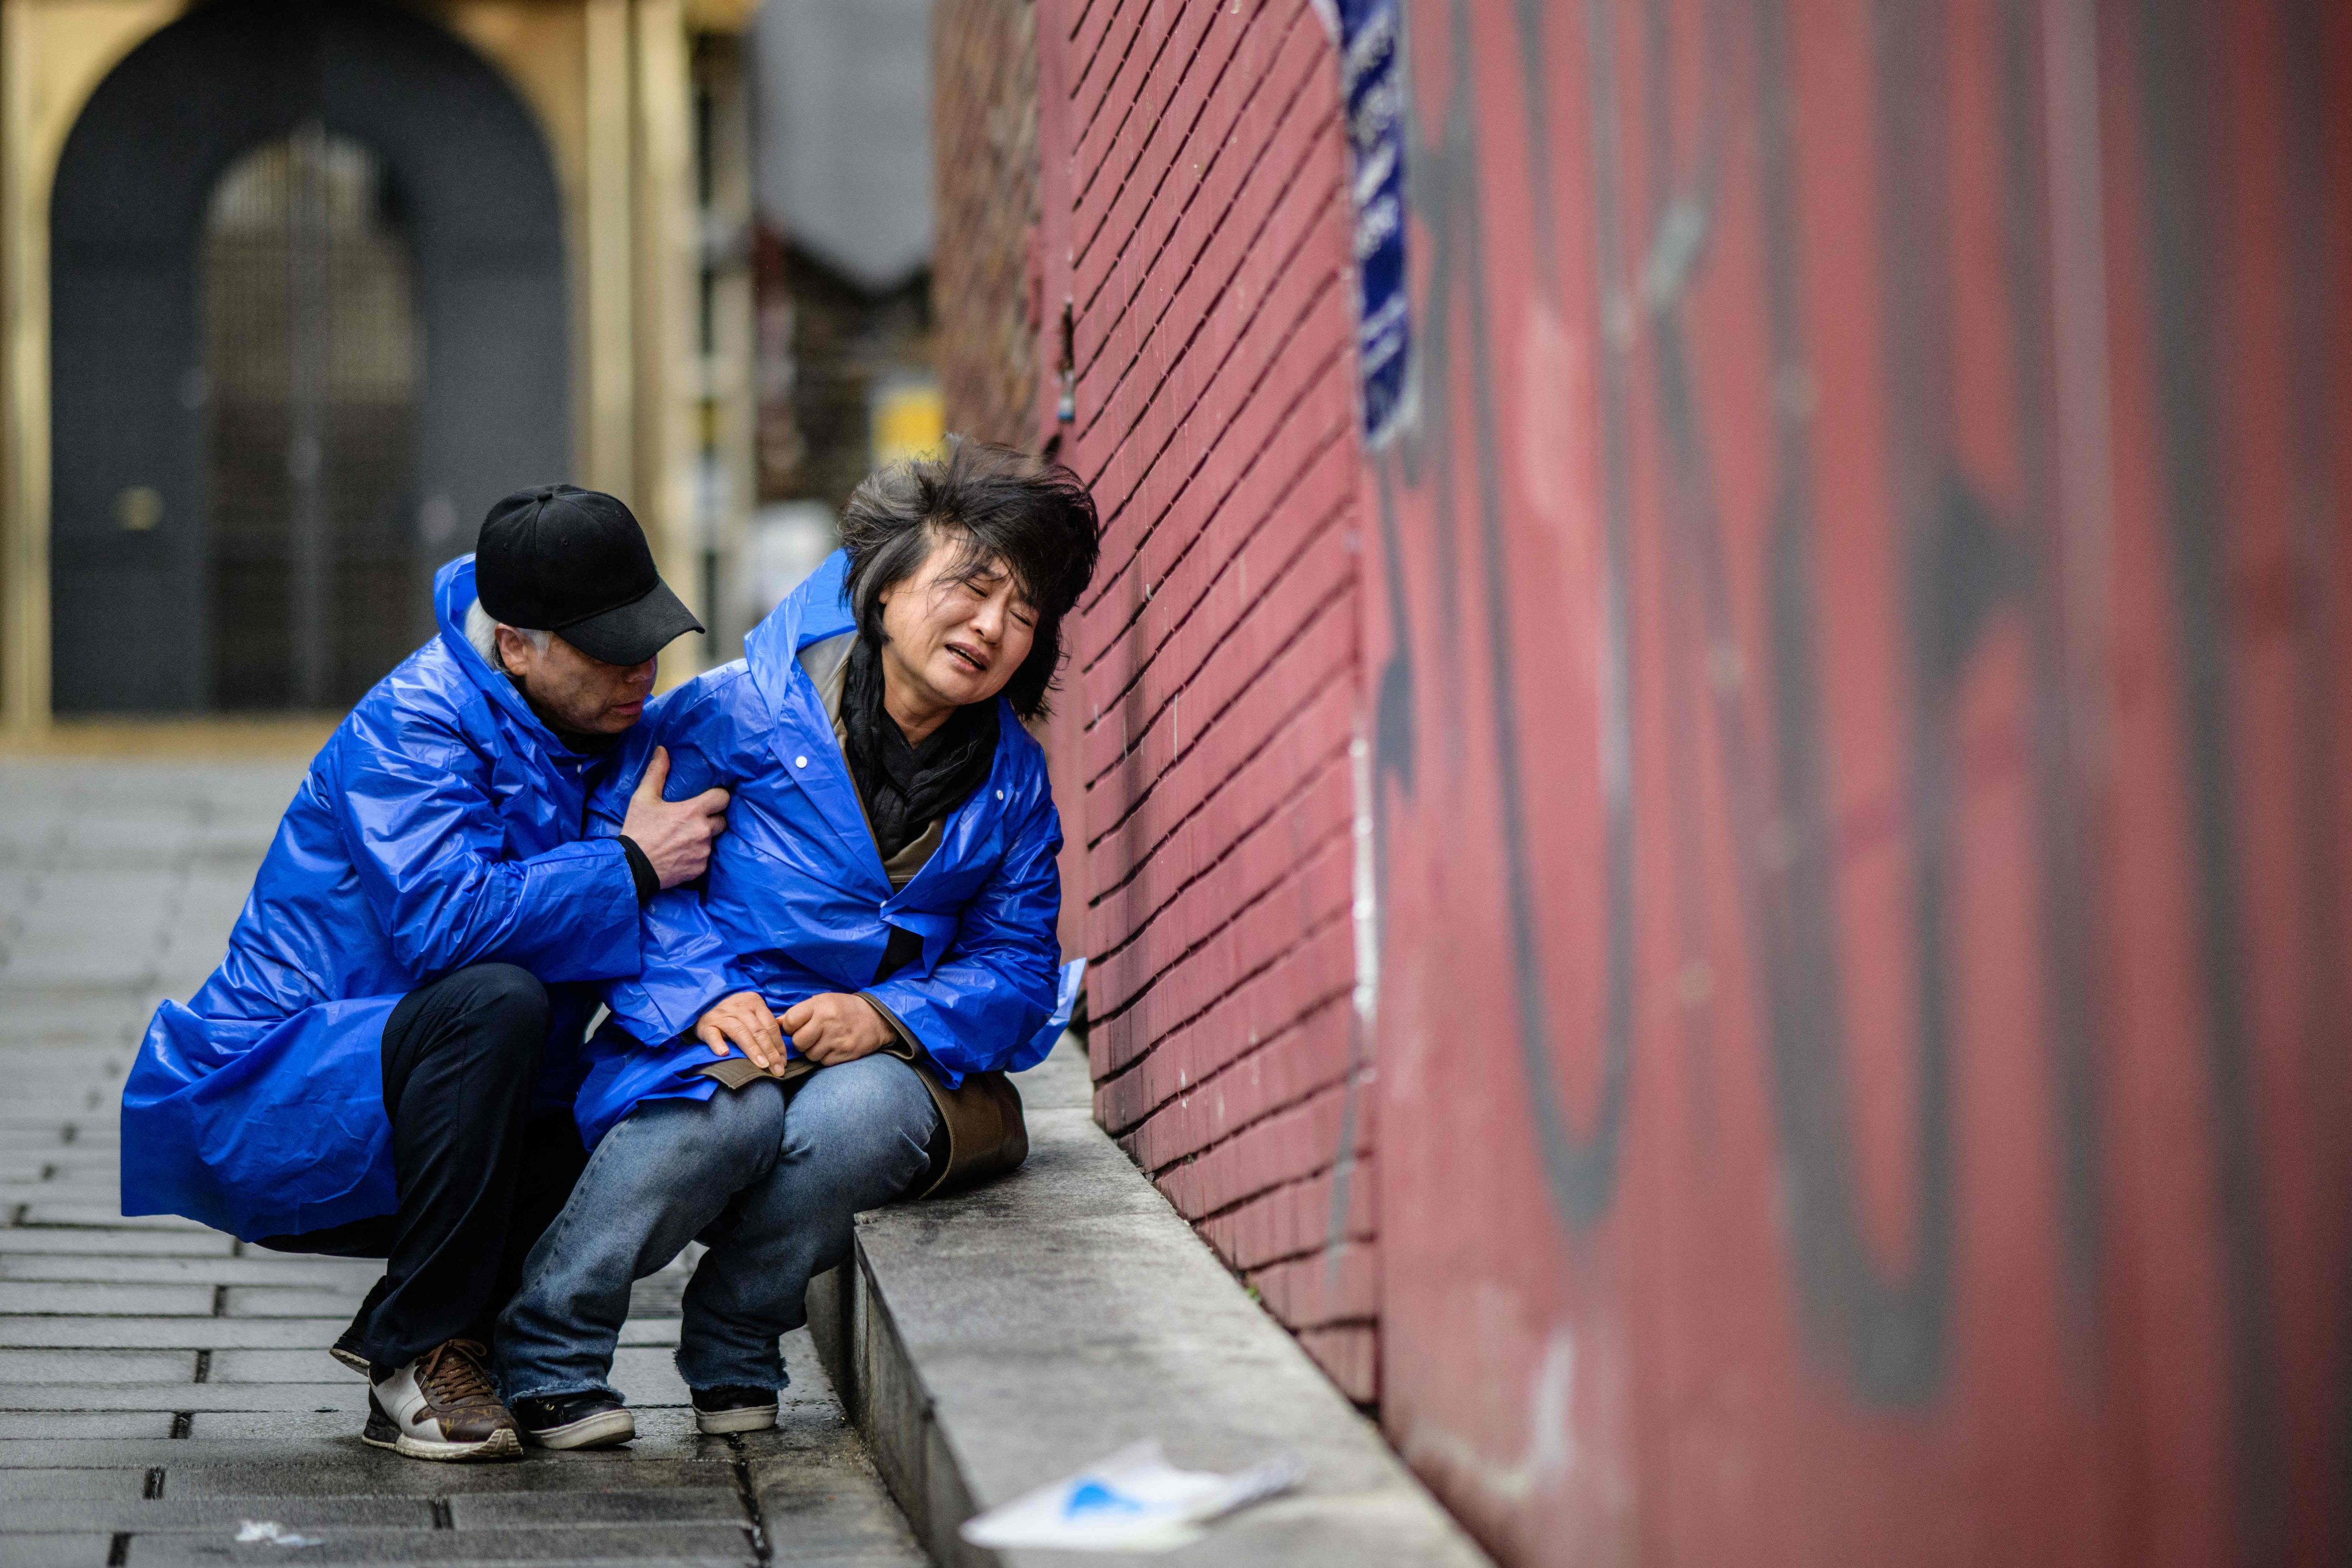 Cho Mi-eun cries as her husband Lee Jong-chul kneels down to comfort her in the alleyway where their 24-year-old son was killed in the crowd crush in Itaewon, Seoul, in October. Photo: AFP